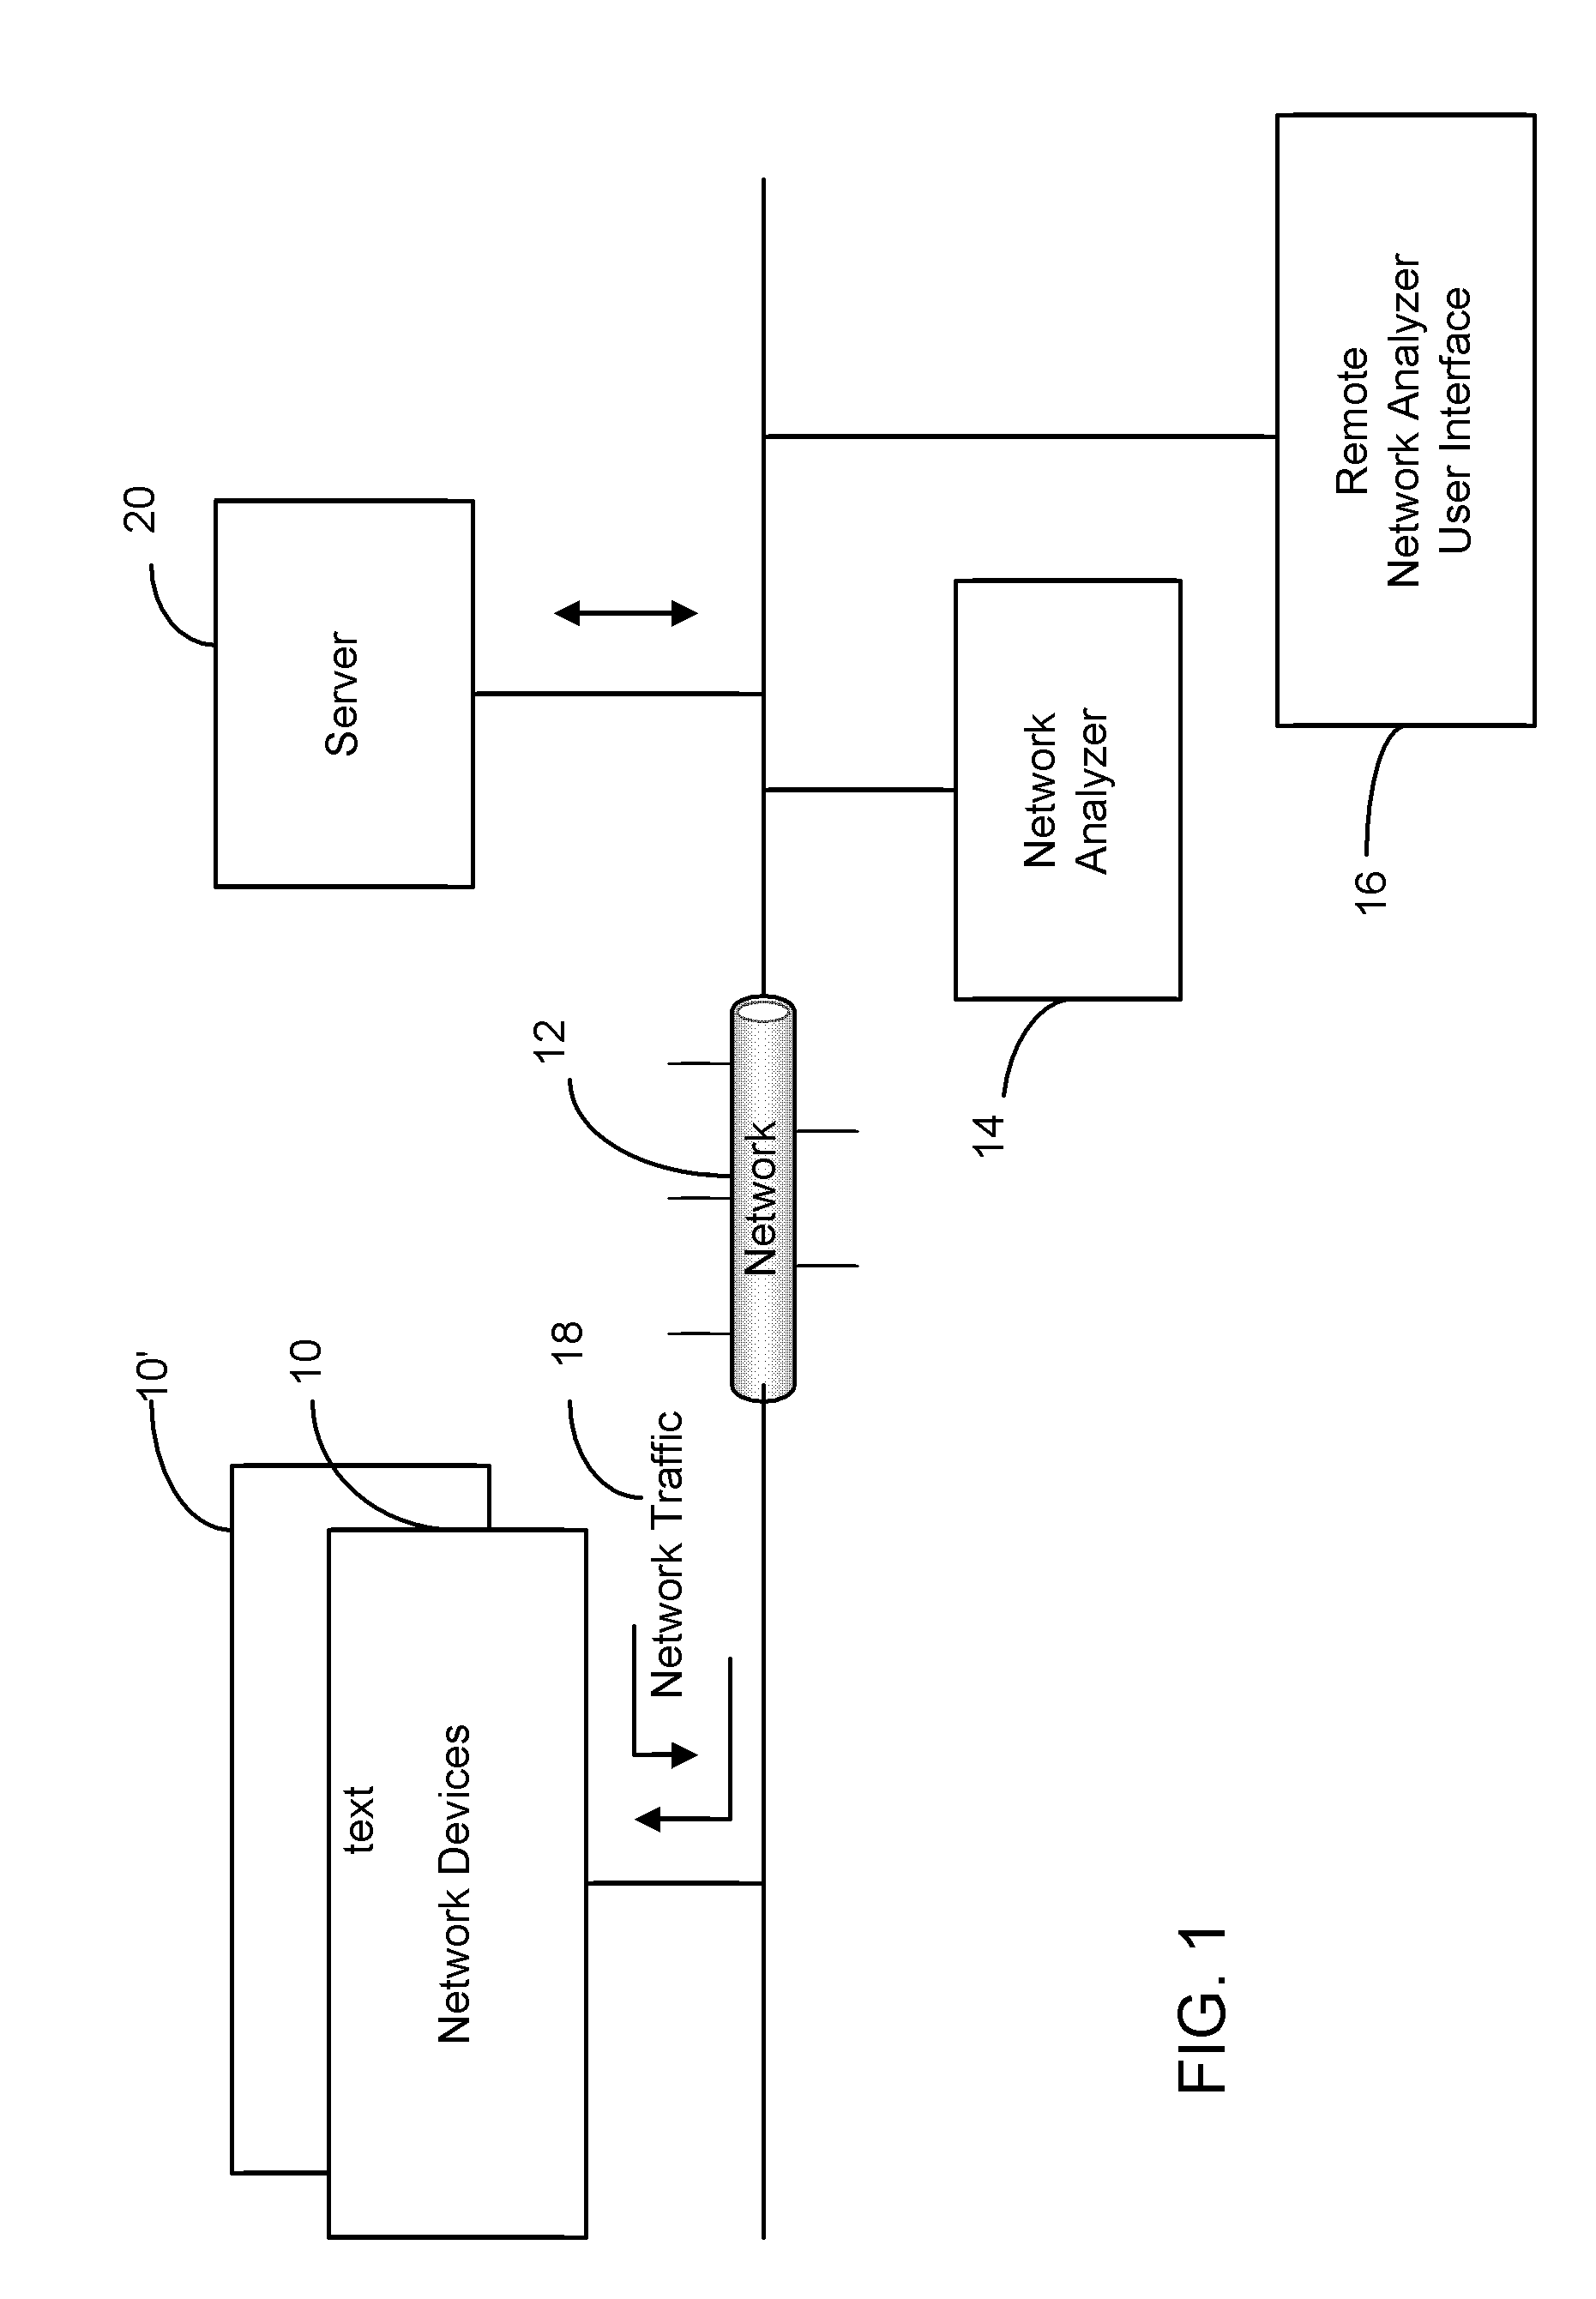 Method and apparatus of duplicate packet detection and discard